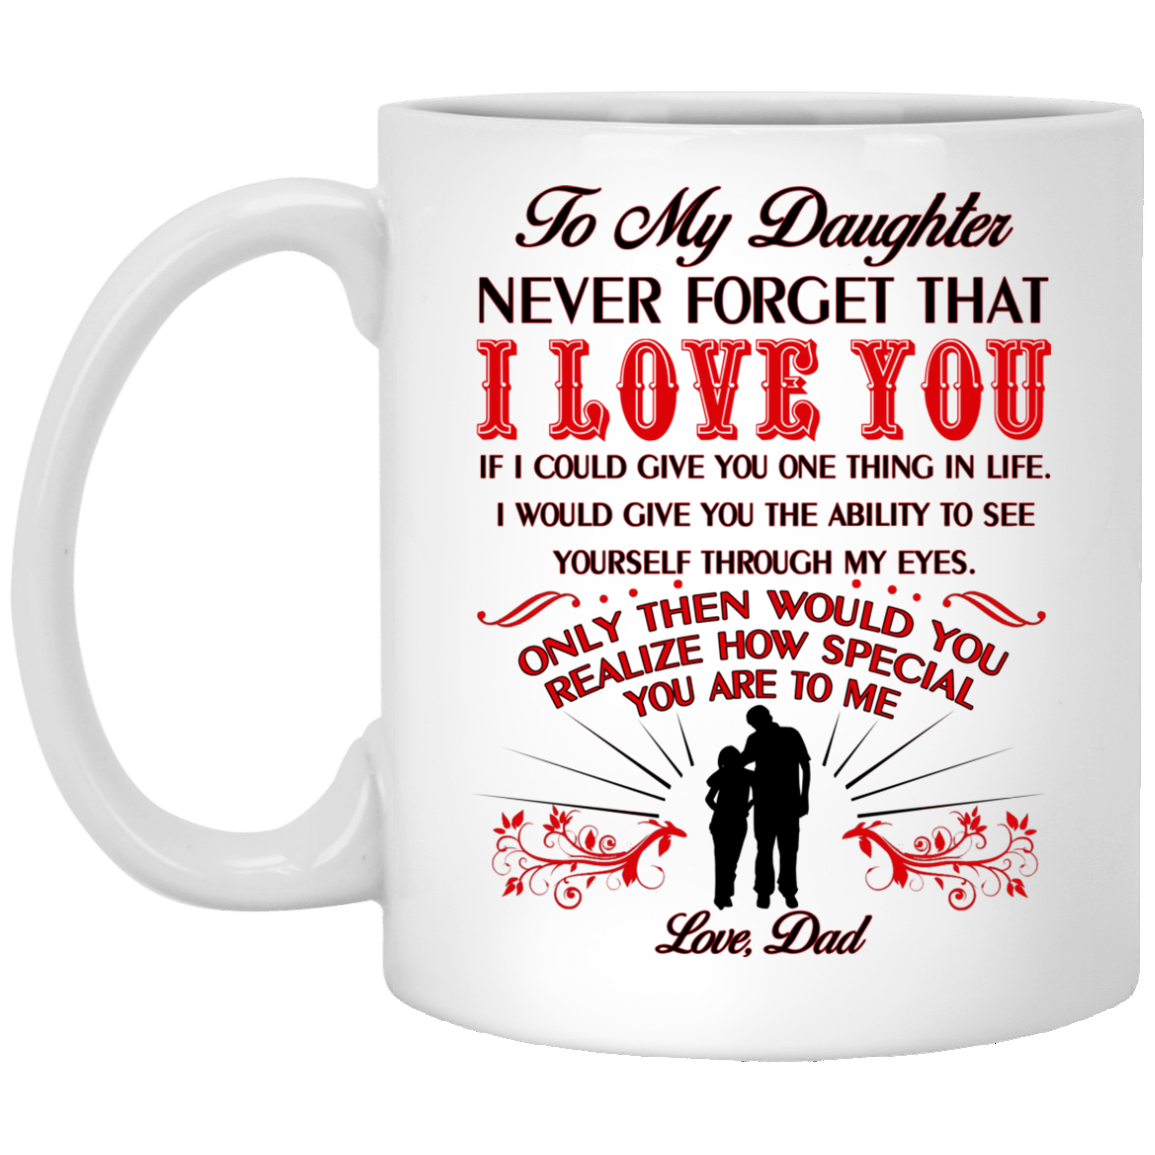 To My Daughter Love Dad Mug - Never forget that I love you